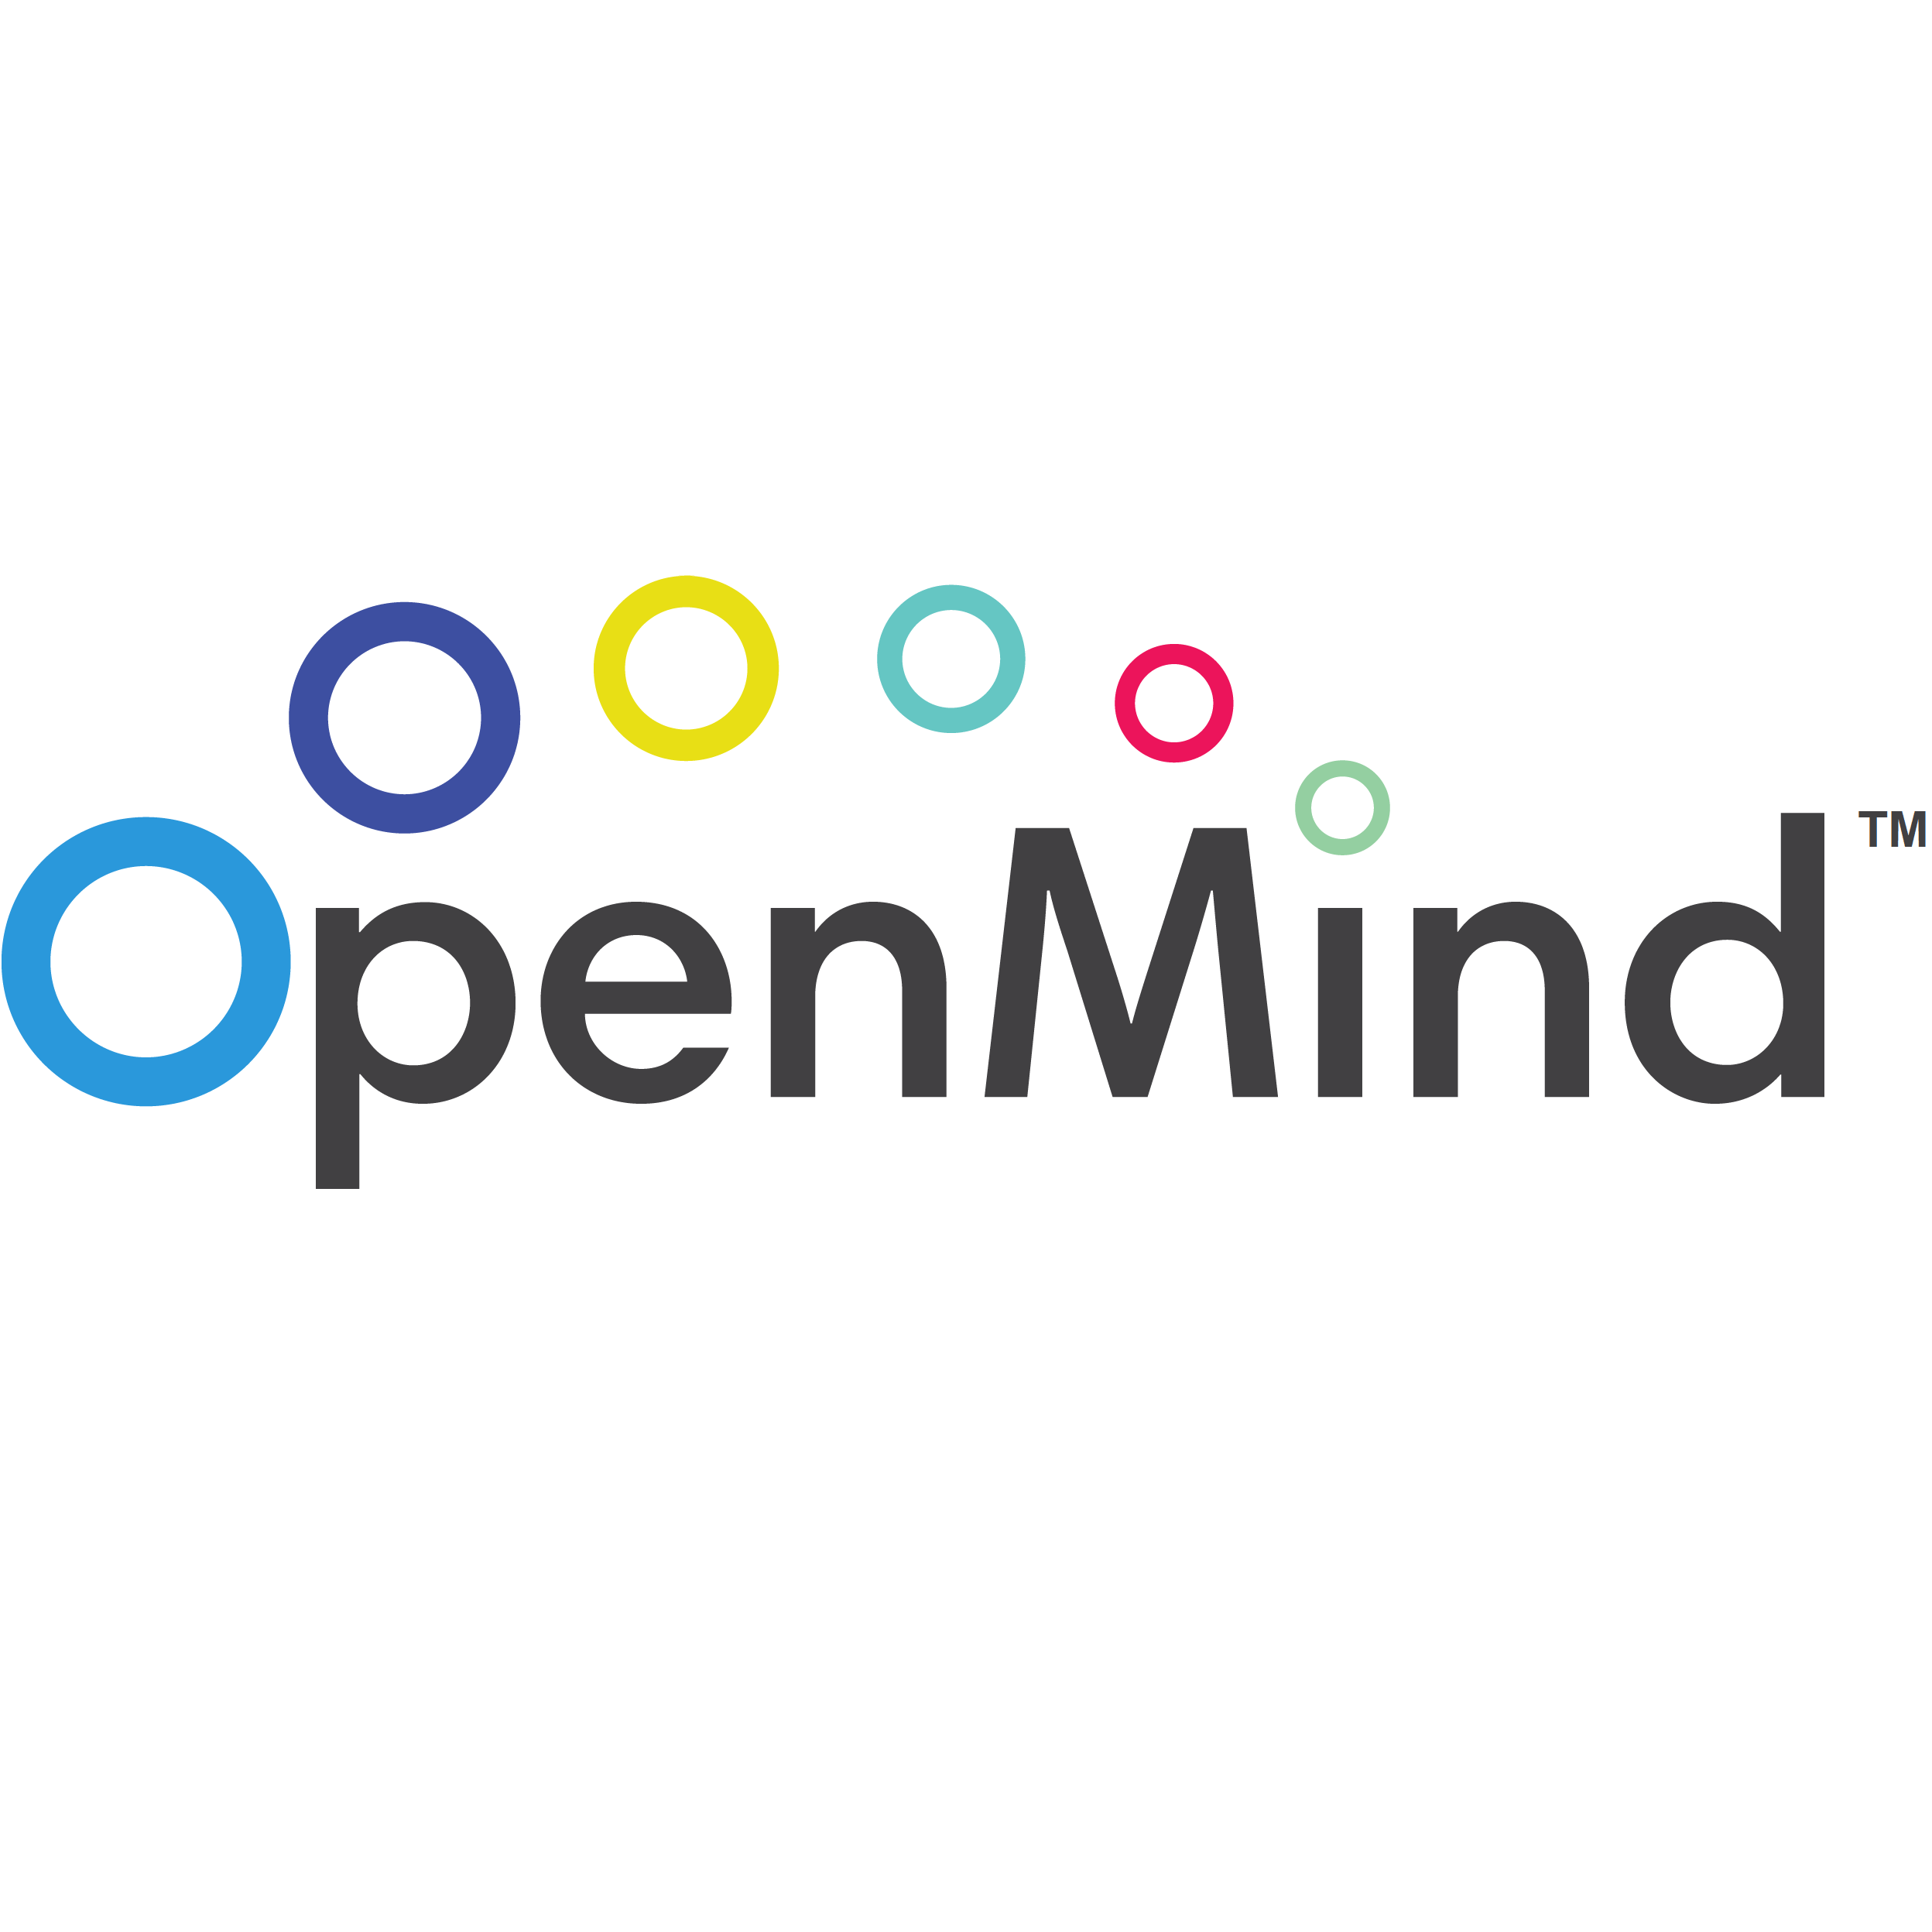 Openmind white background with tm added top layer square background